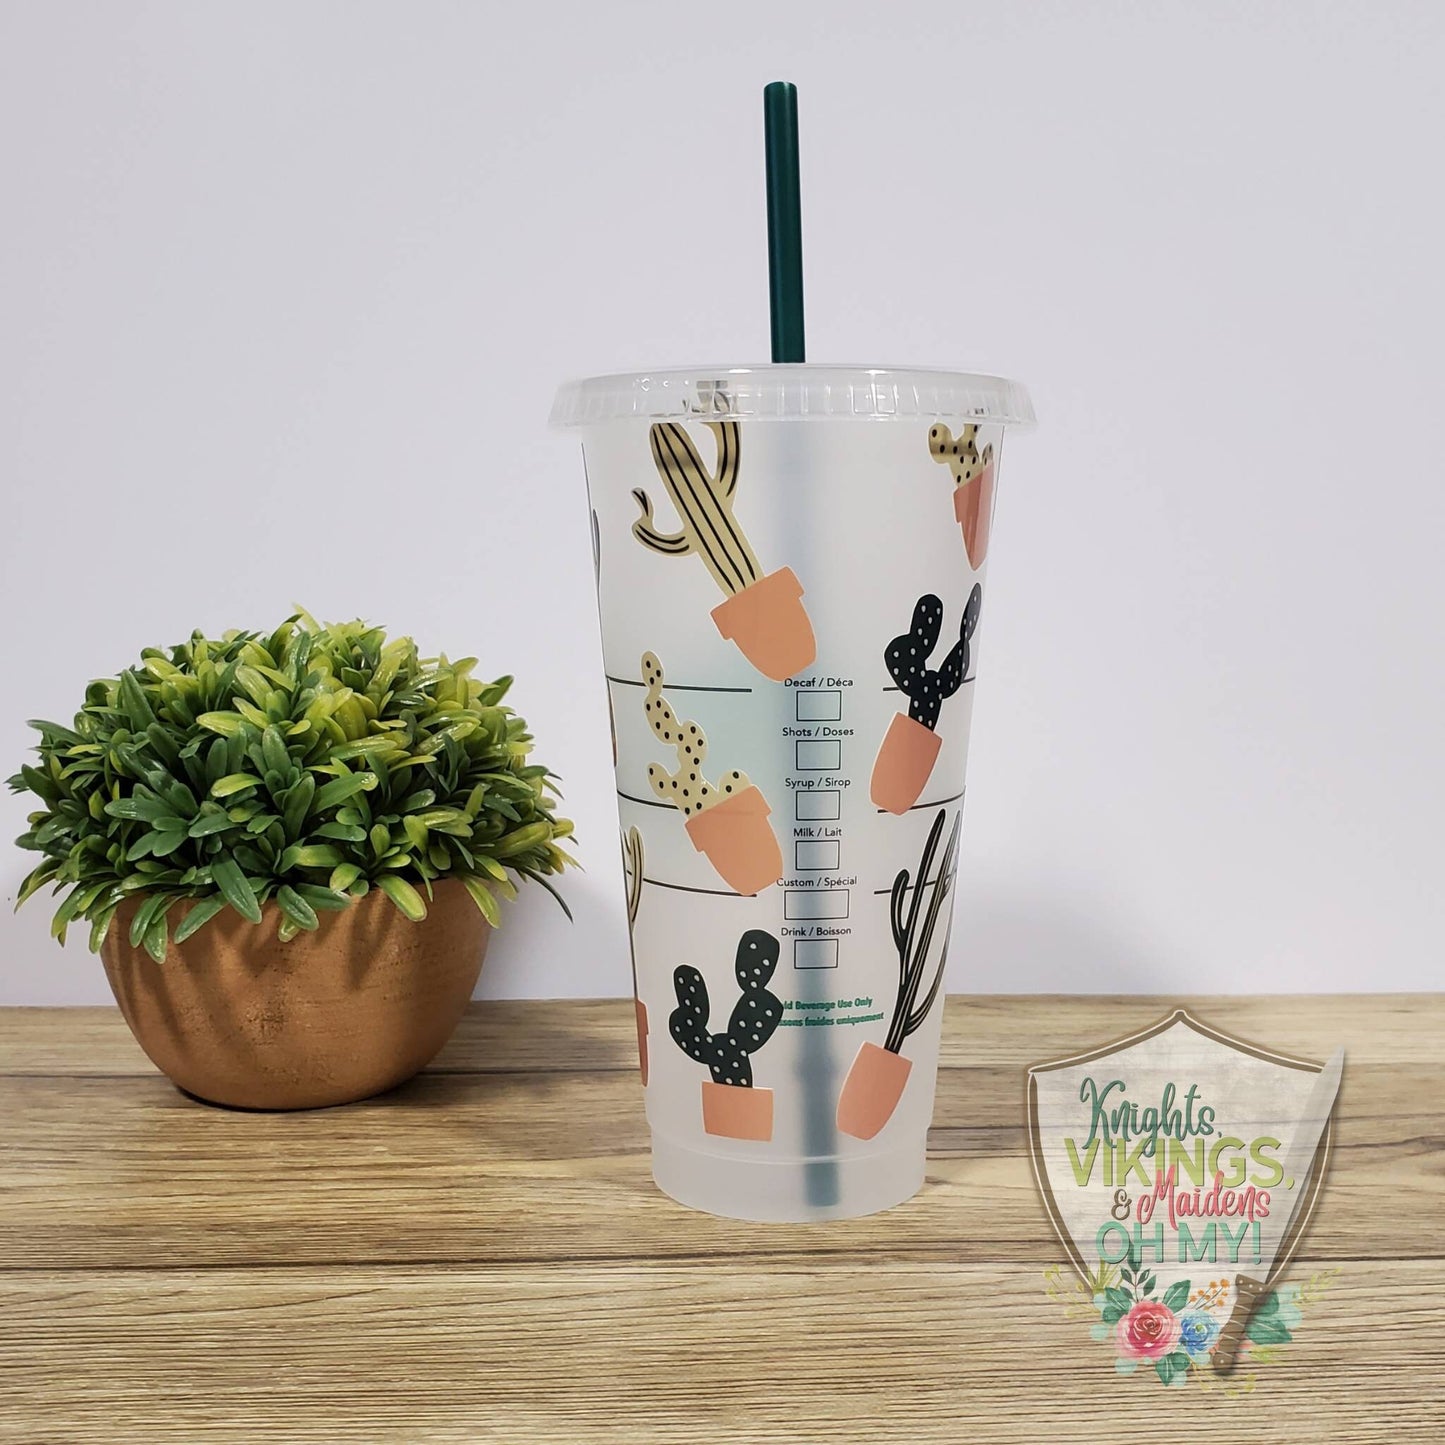 Cactus Pot Plant, Starbucks Cold Cup with Straw